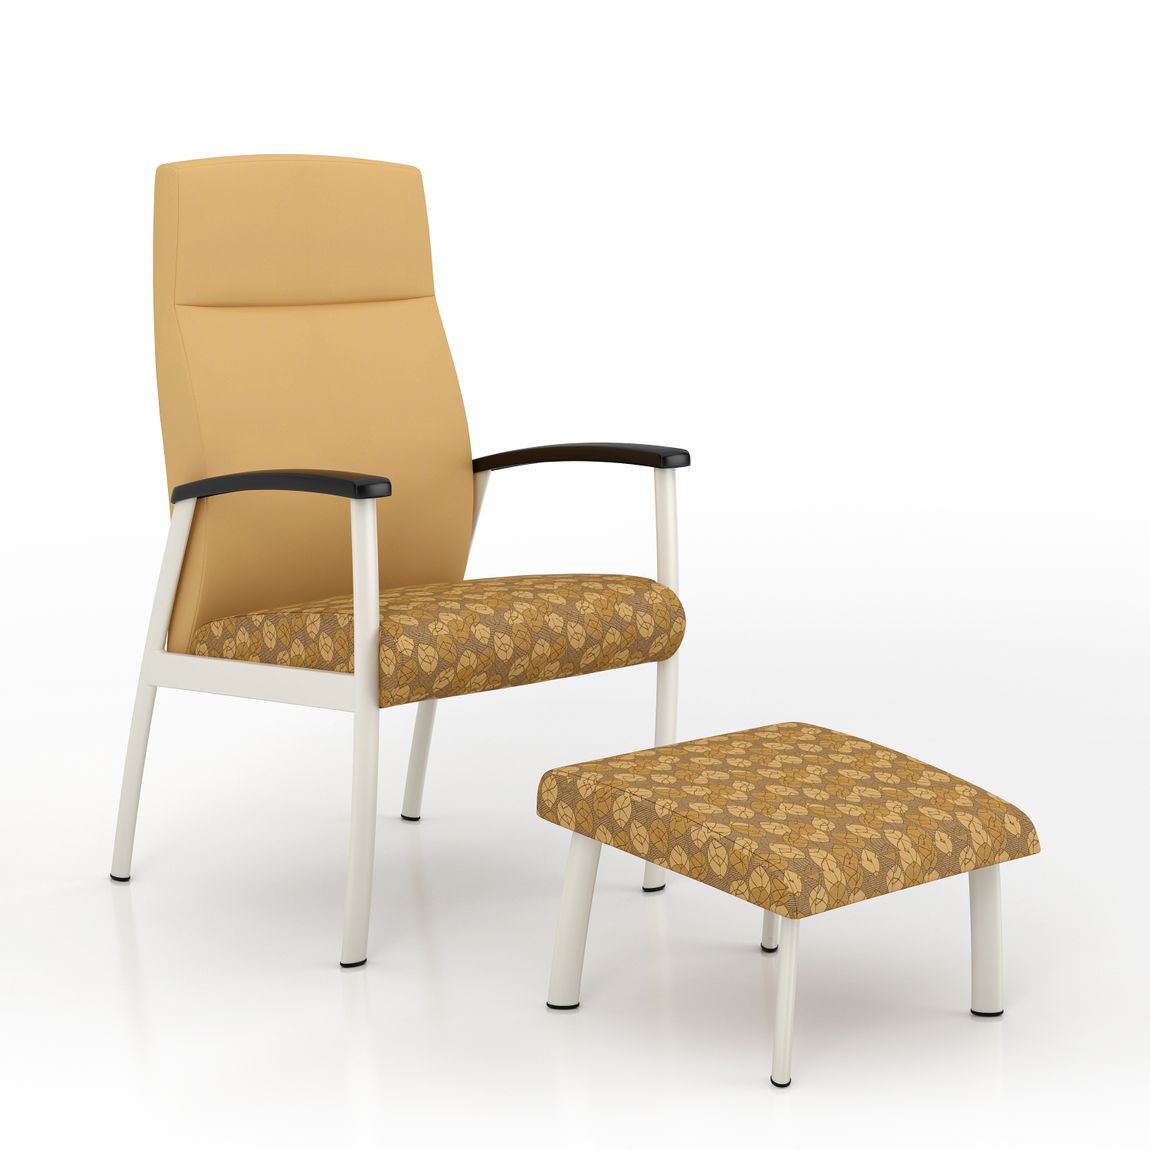 Lab Chairs – Healthcare Furniture